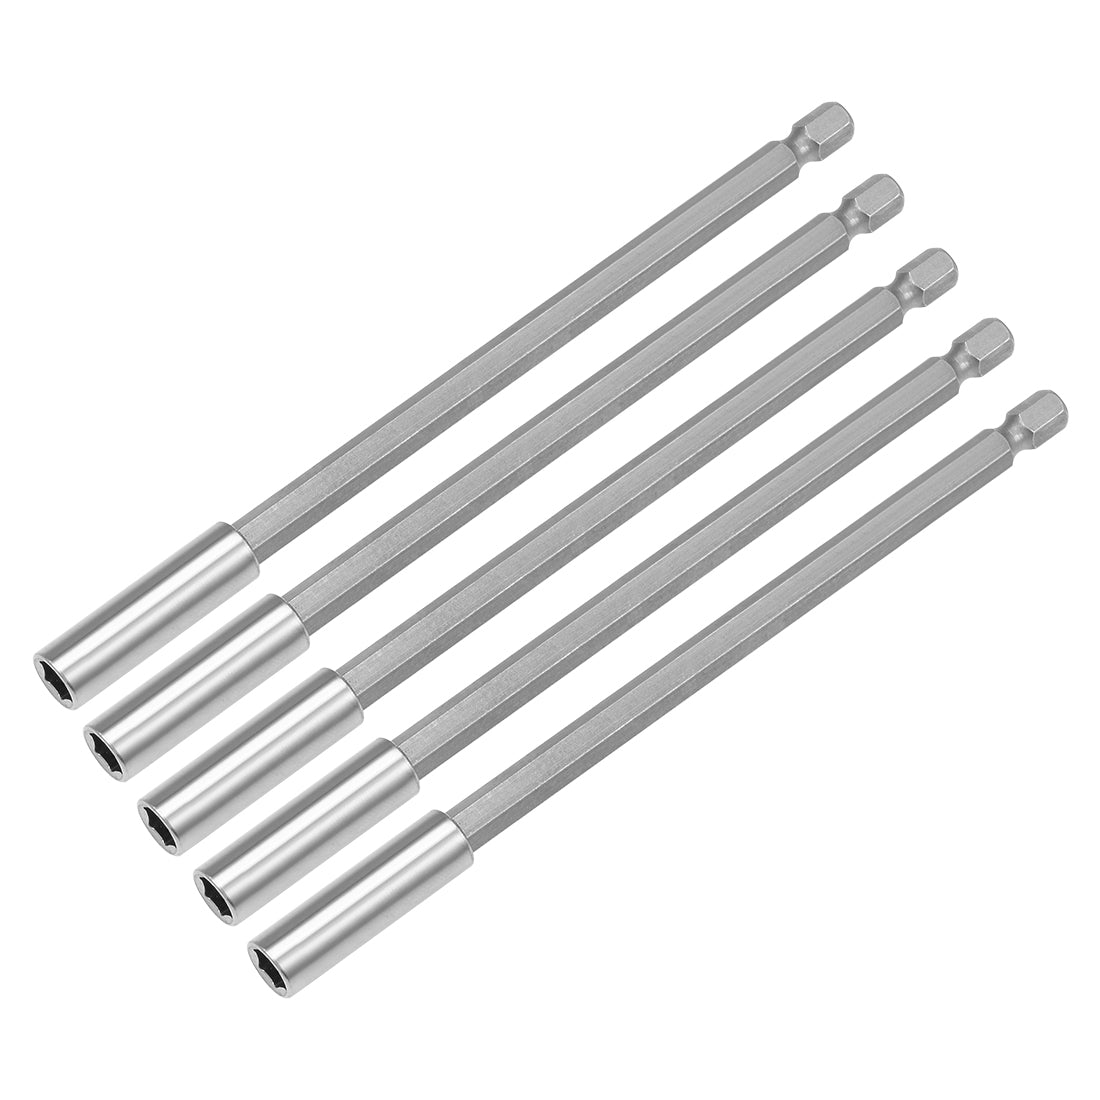 uxcell Uxcell 5 Pcs 1/4 Inch Hex Shank by 6 Inch Magnetic Bit Holder Extension, Quick Release Screwdriver Drill Bit Power Tool